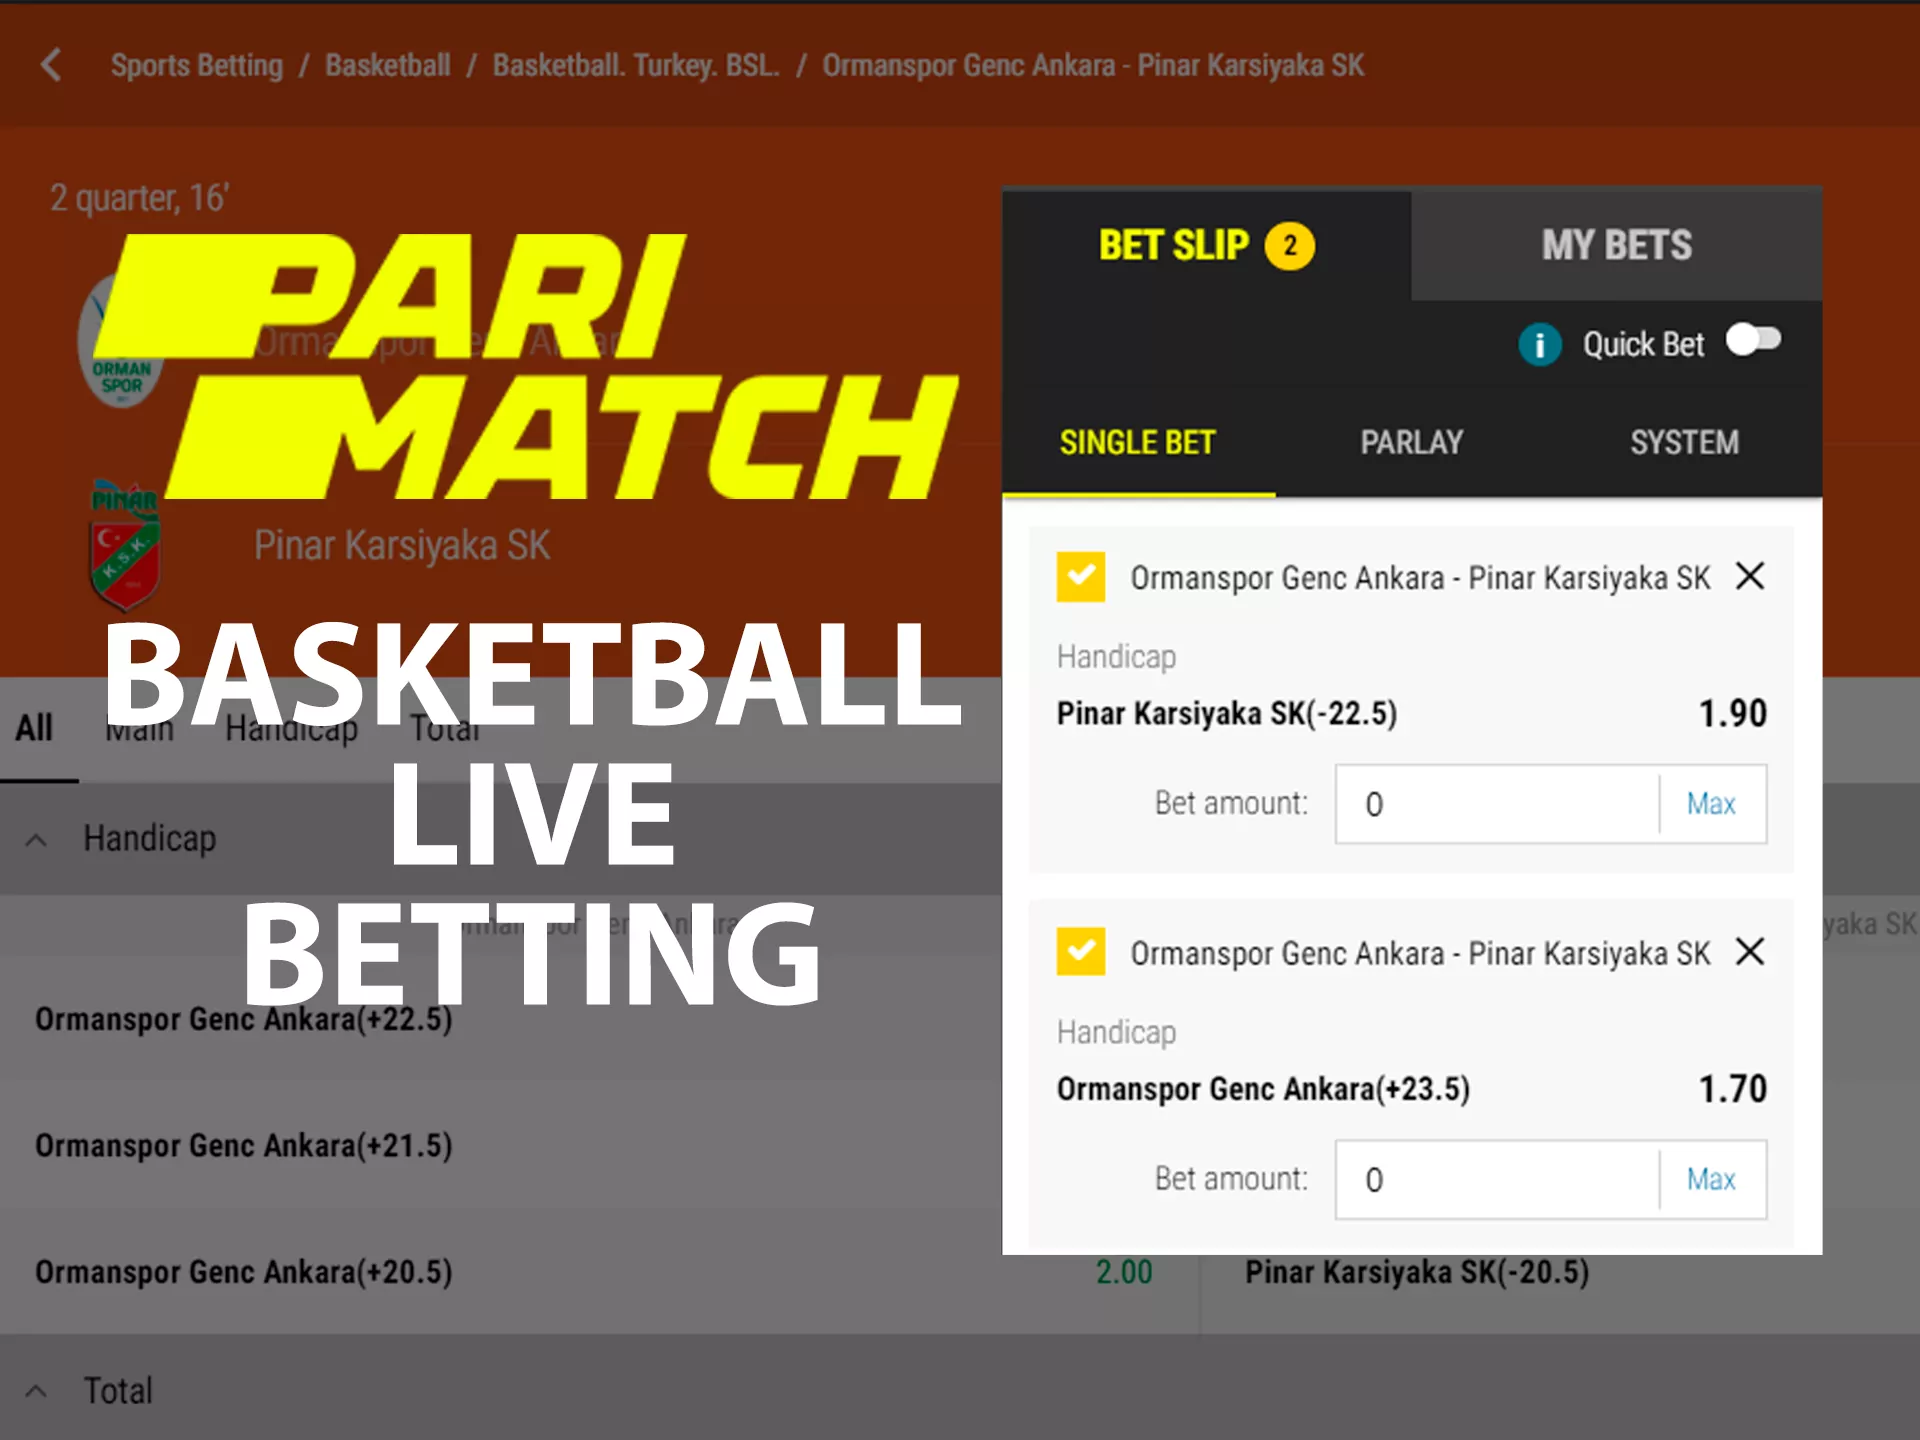 You can watch basketball streamings and place live bets right at Parimatch website.